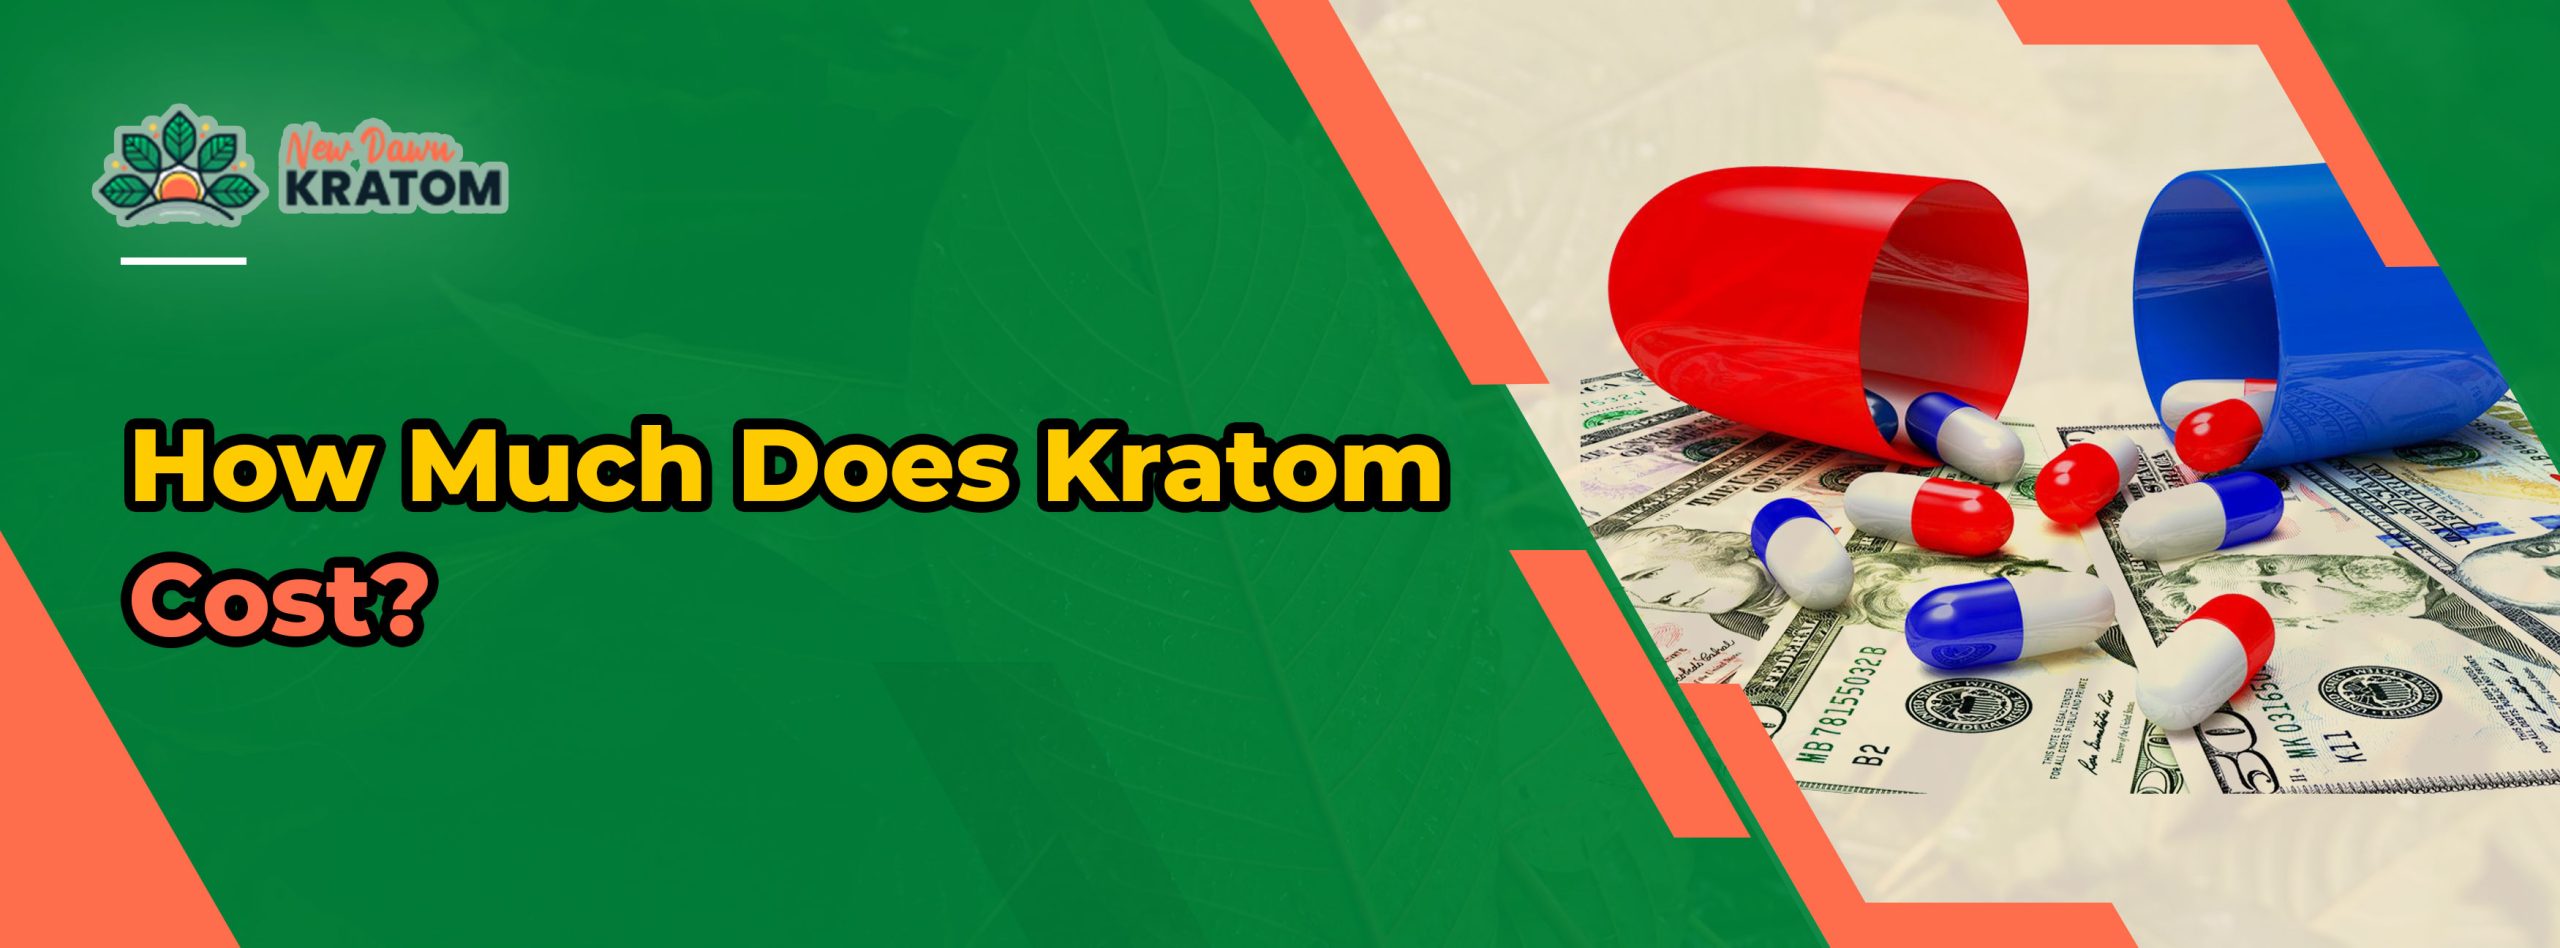 How Much Does KratomCost?